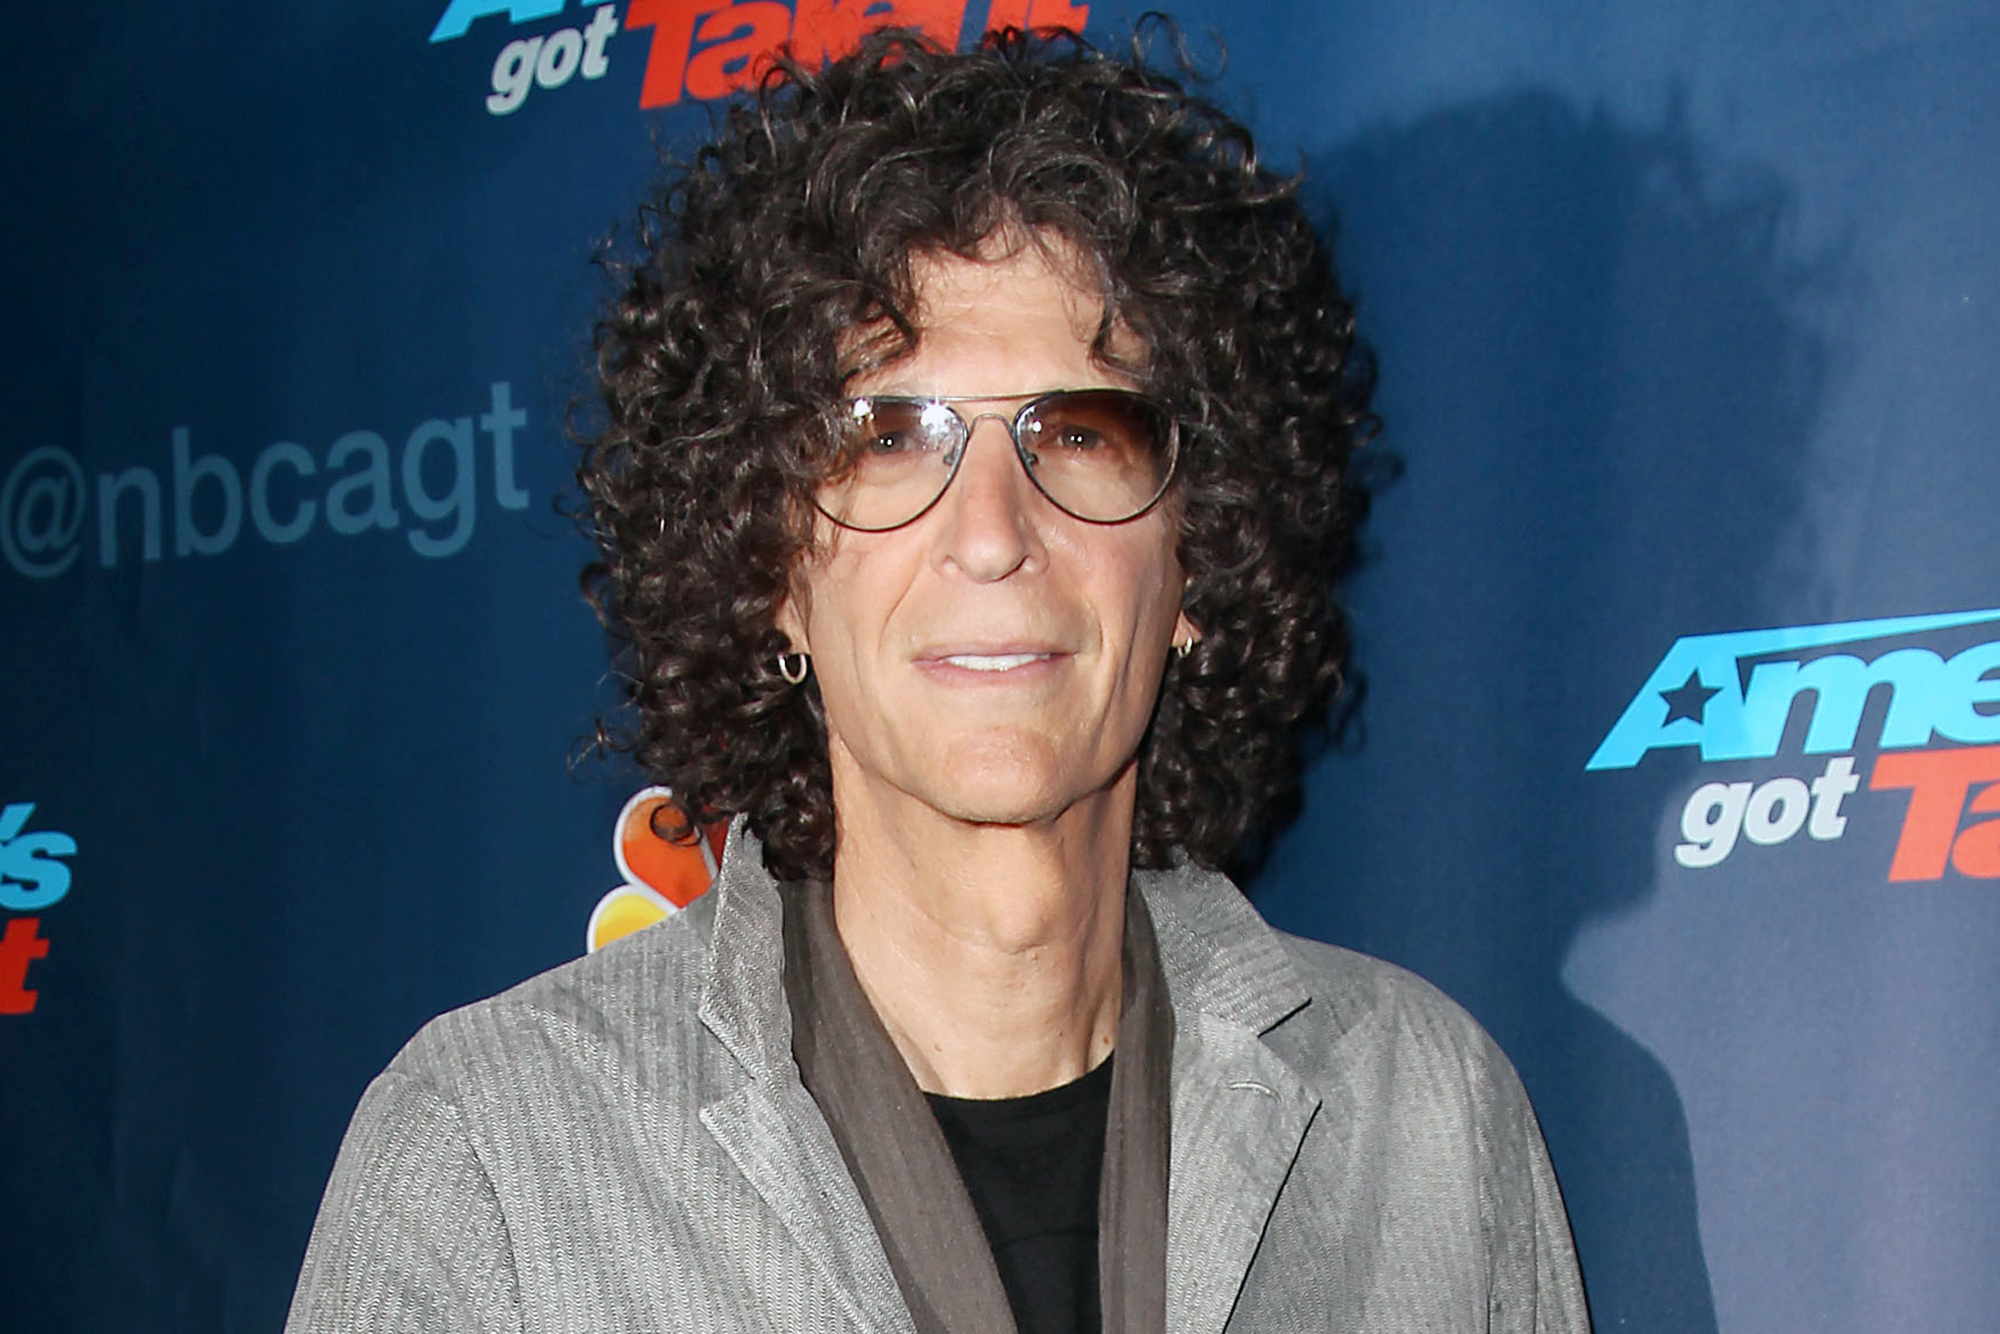 "Howard Stern has become politically correct, and the woman getting th...